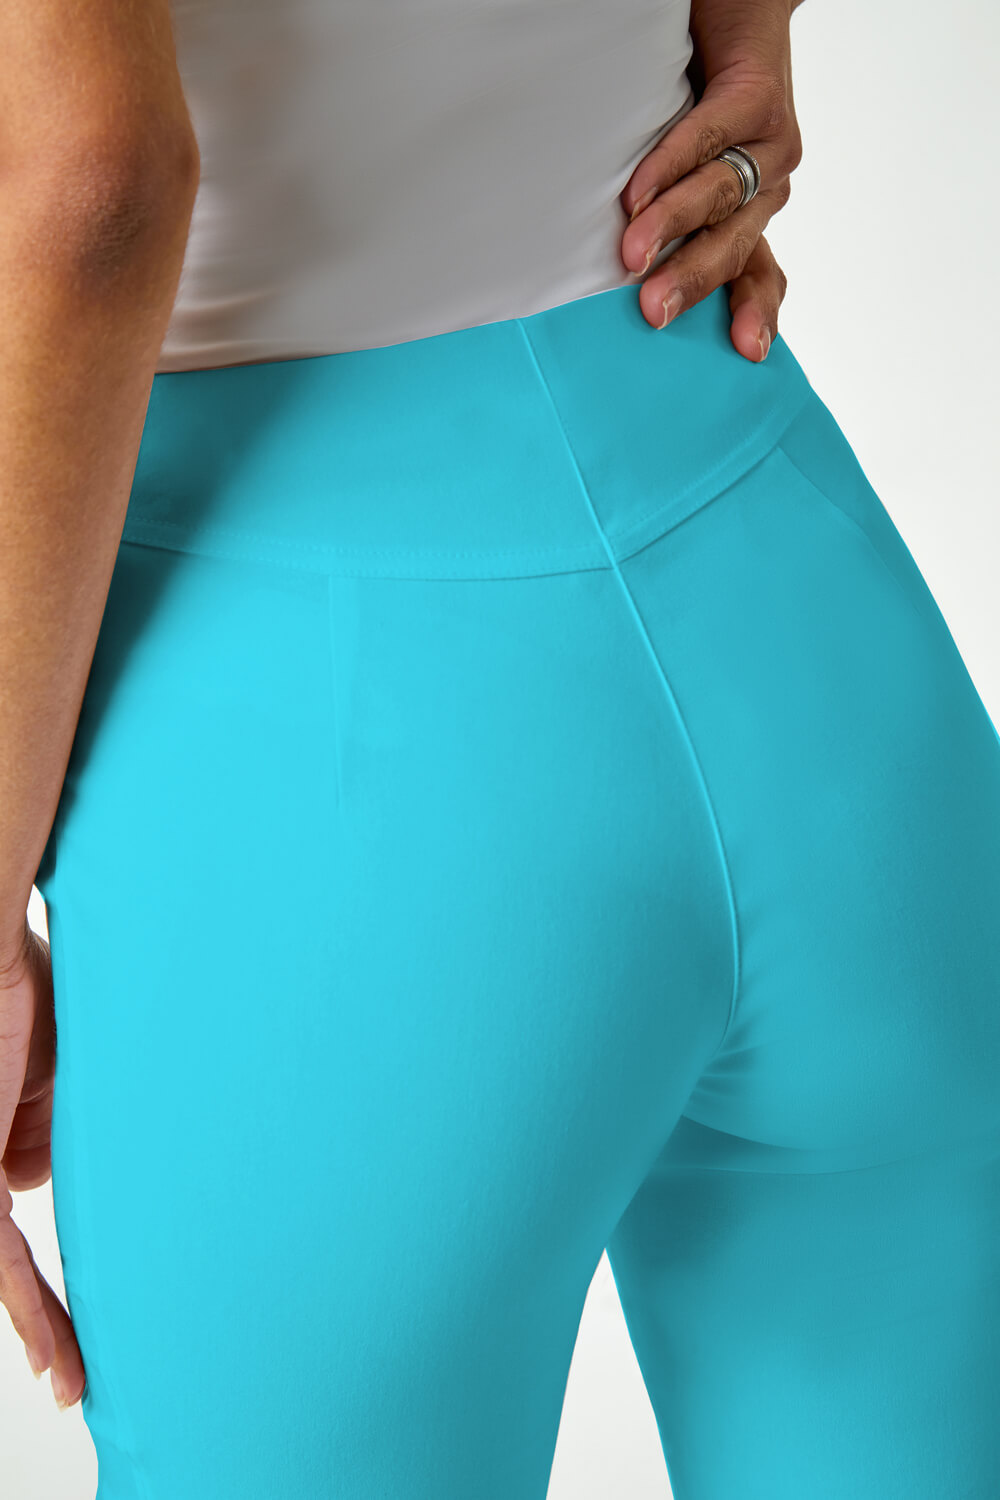 Turquoise Knee Length Stretch Shorts, Image 5 of 6